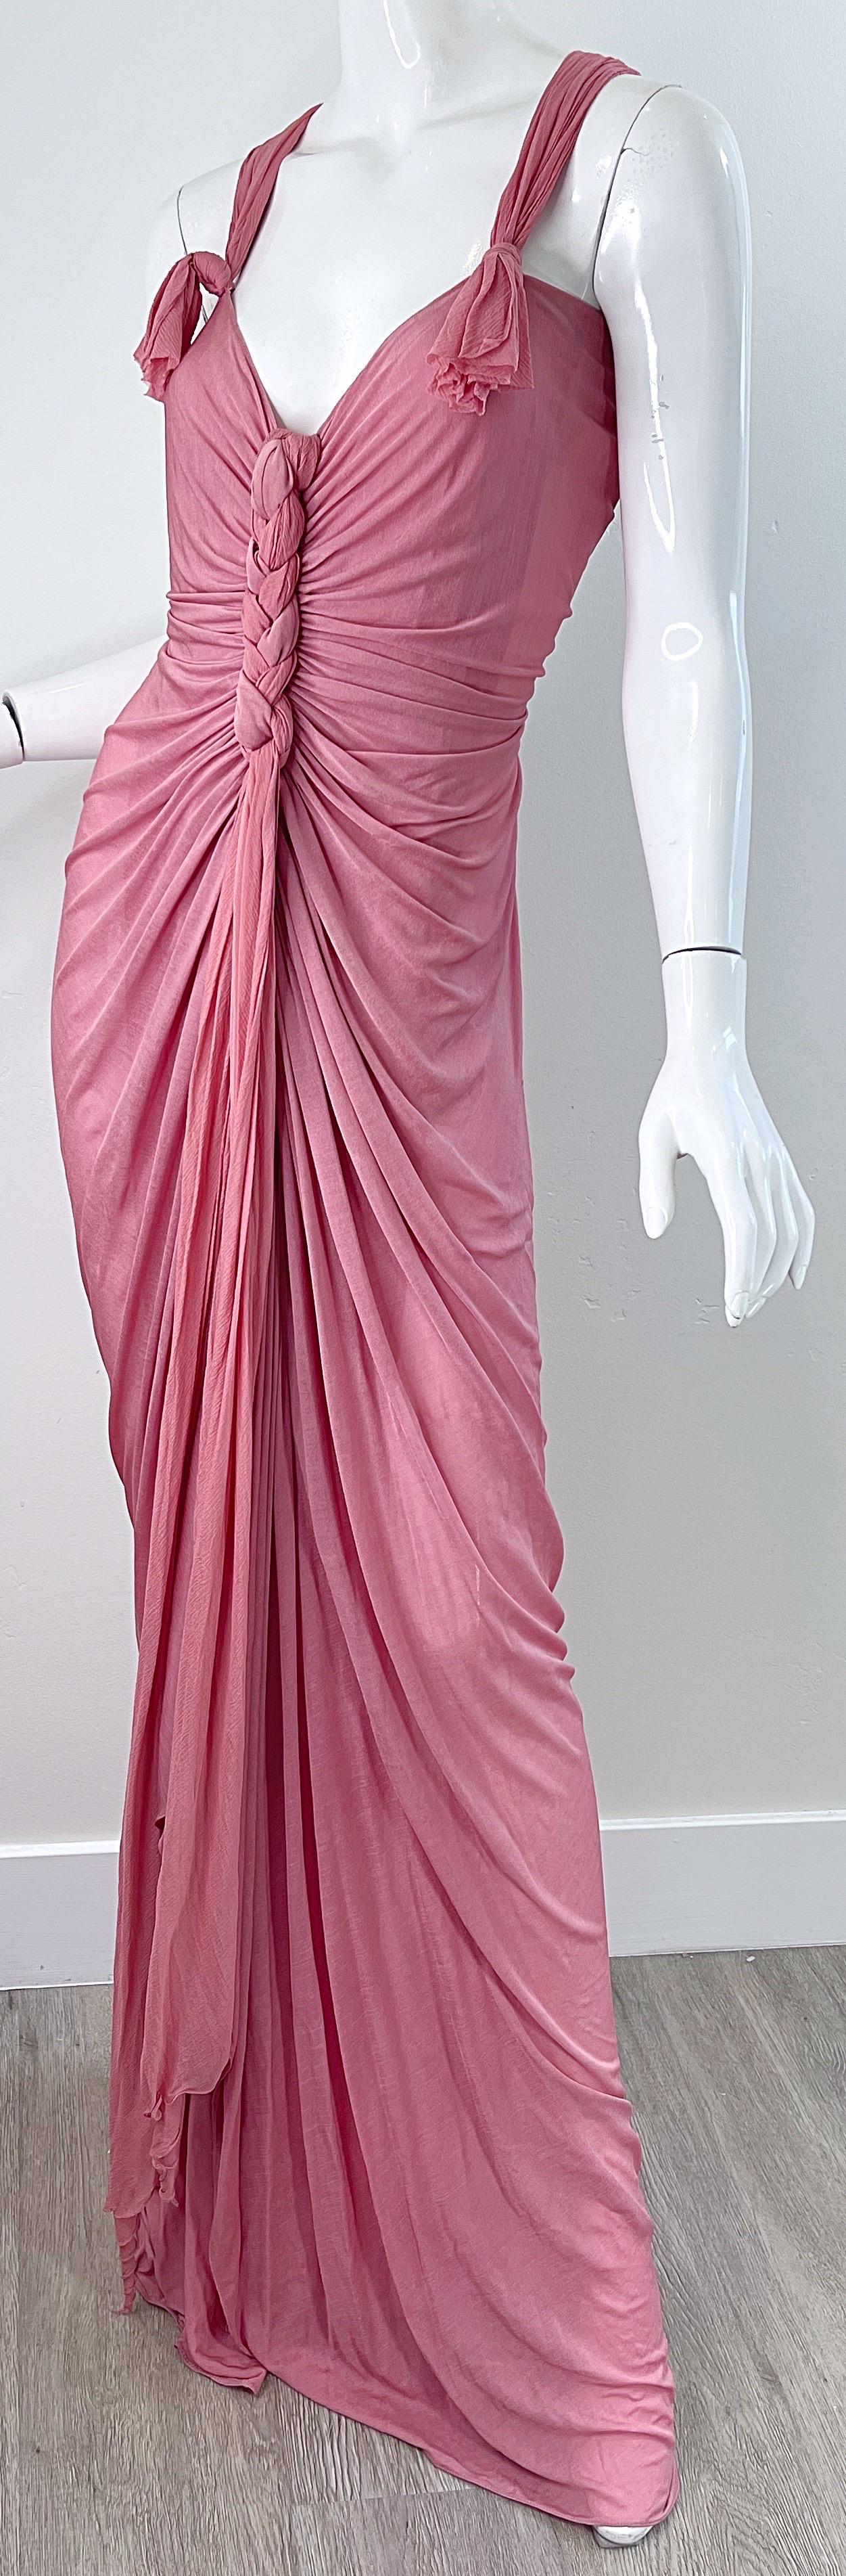 NWT Donna Karan Fall 2005 Pink Dusty Rose Mauve 30s Style Semi Sheer Gown Dress For Sale 9